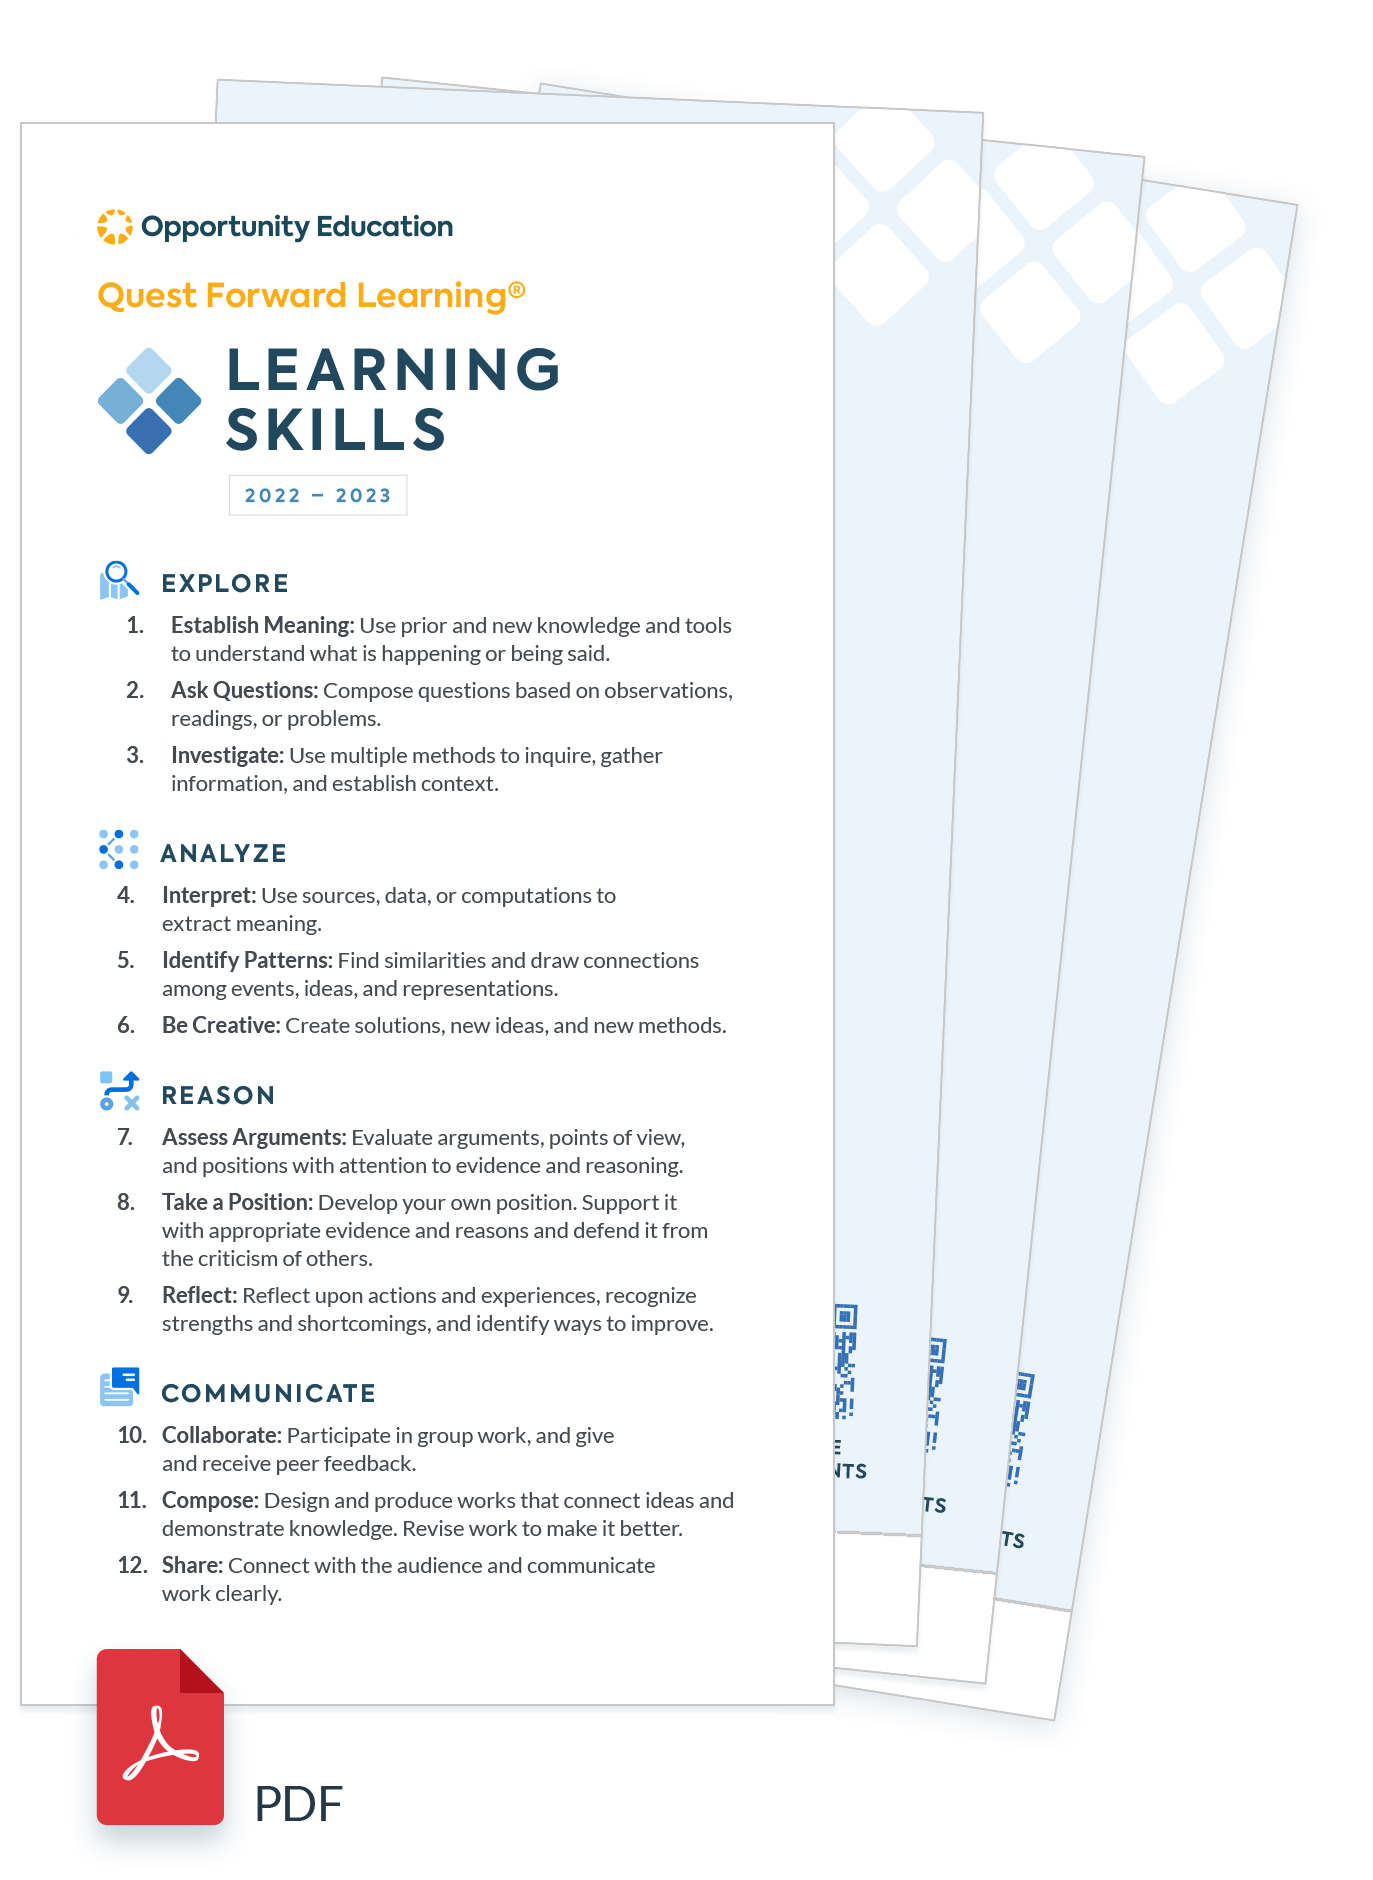 Download a handy set of PDF cards to help you develop your students' learning skills.